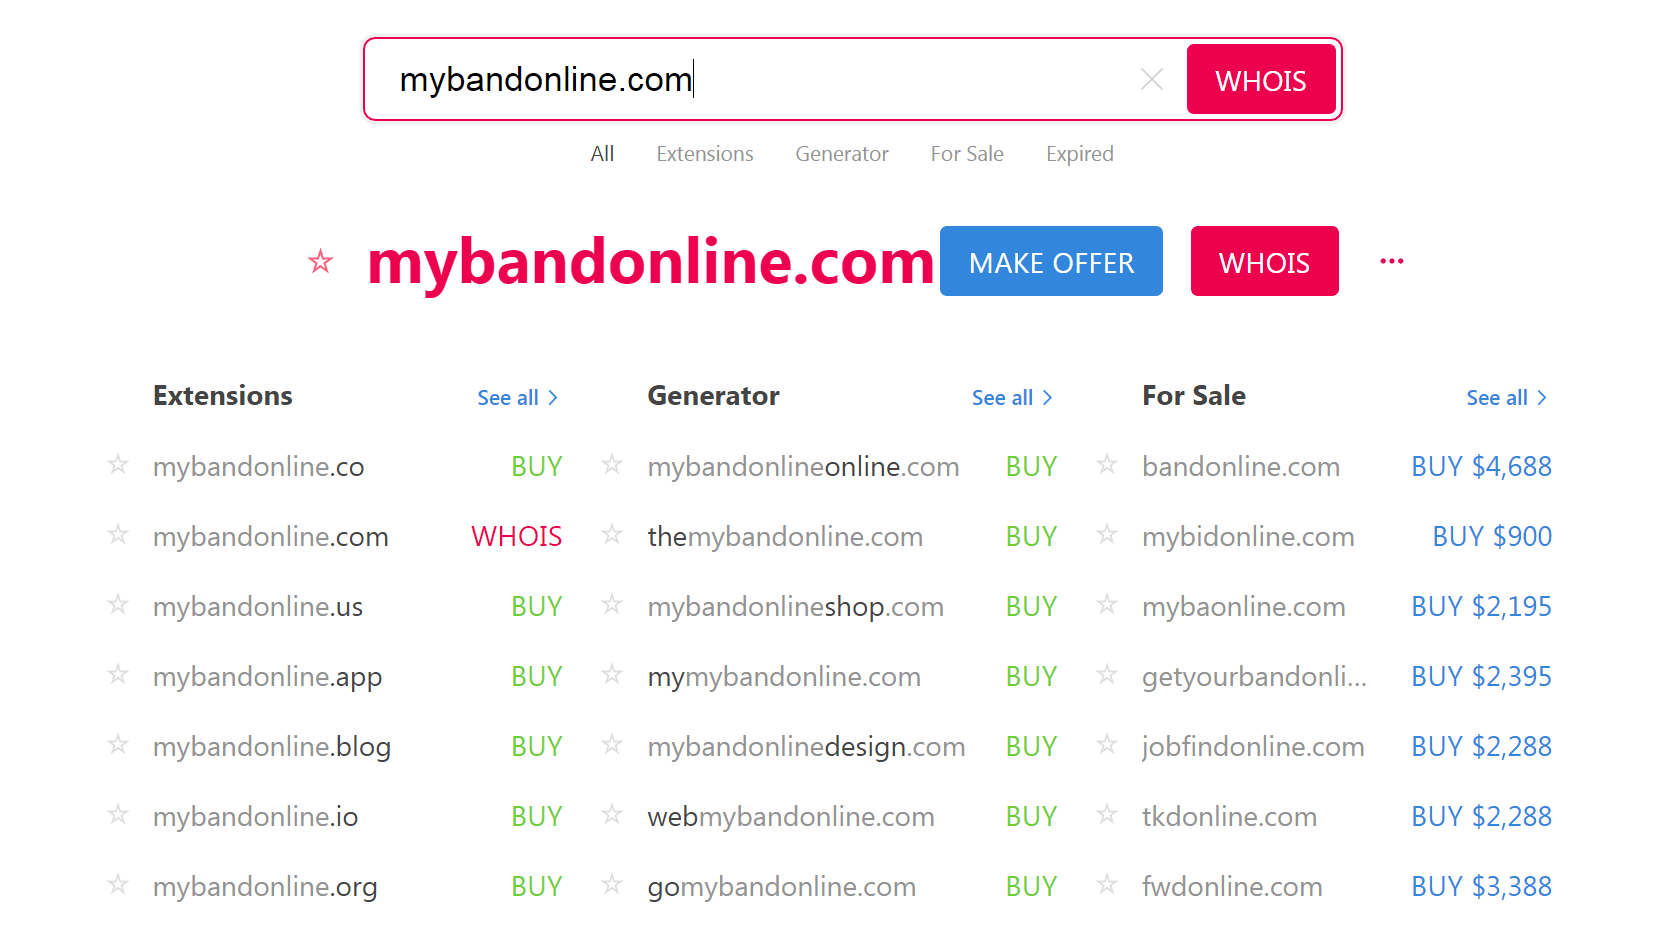 Searching for a musician website domain name.